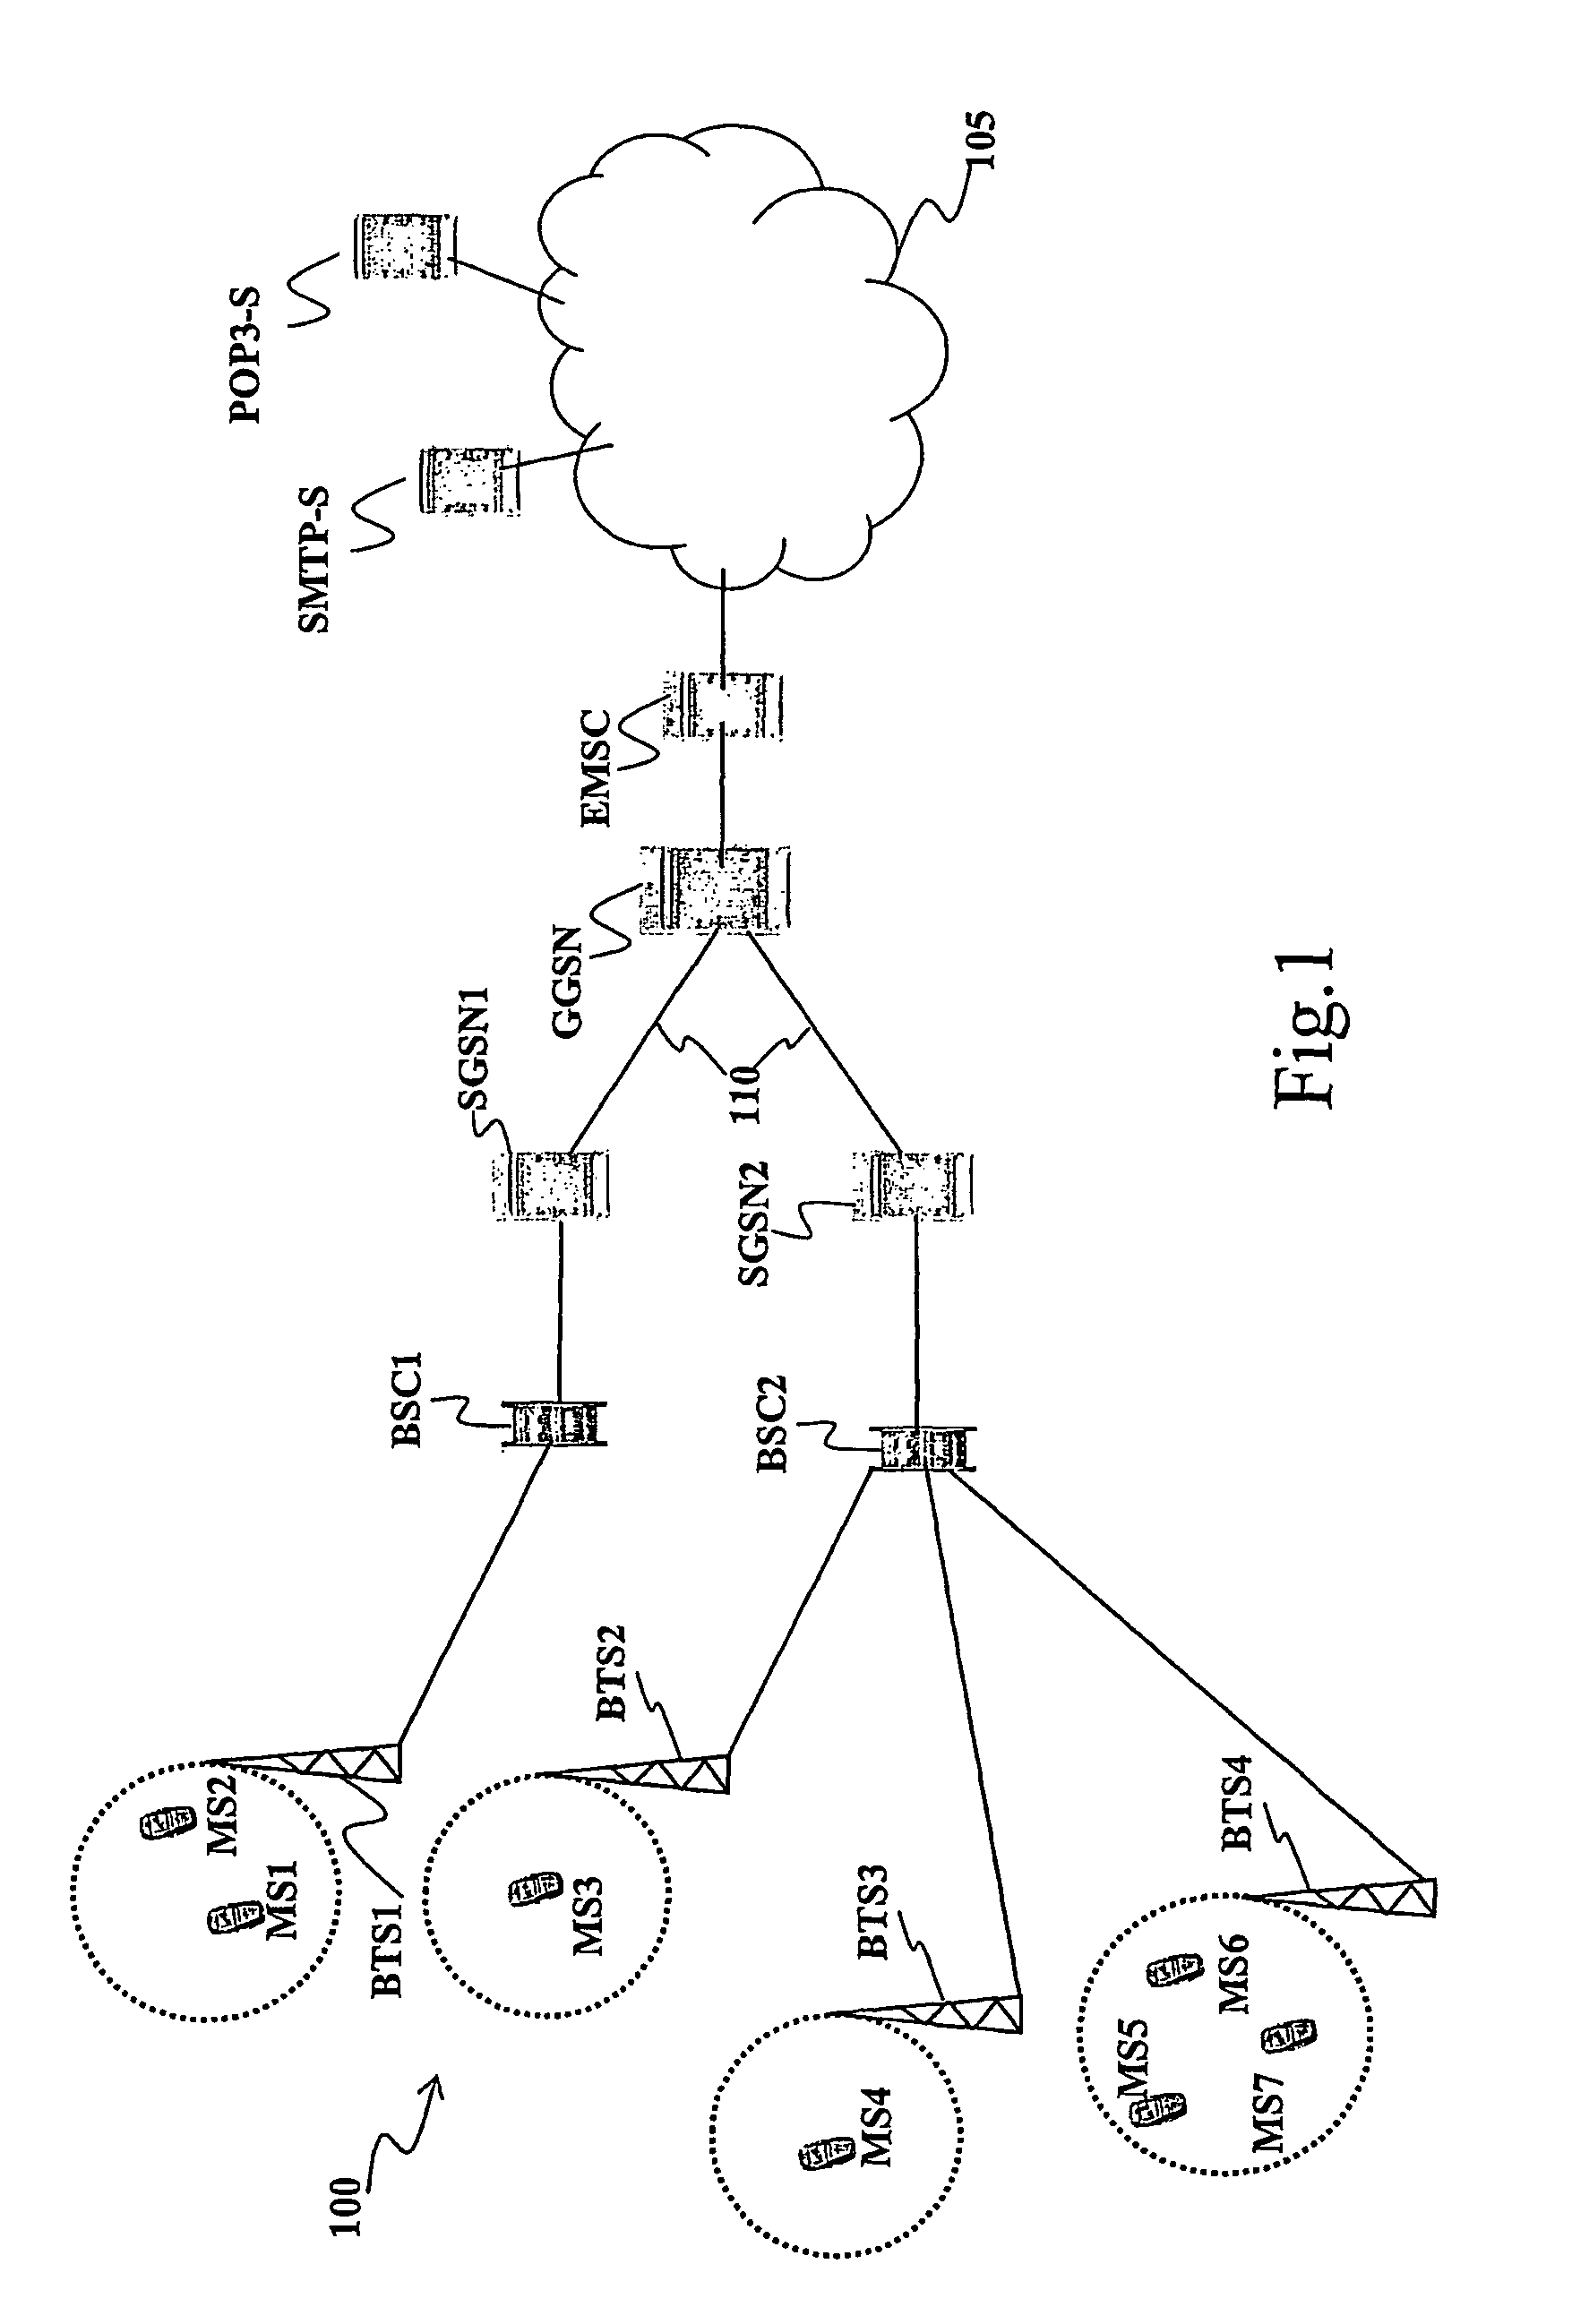 Method, apparatus and communications network for managing electronic mail services